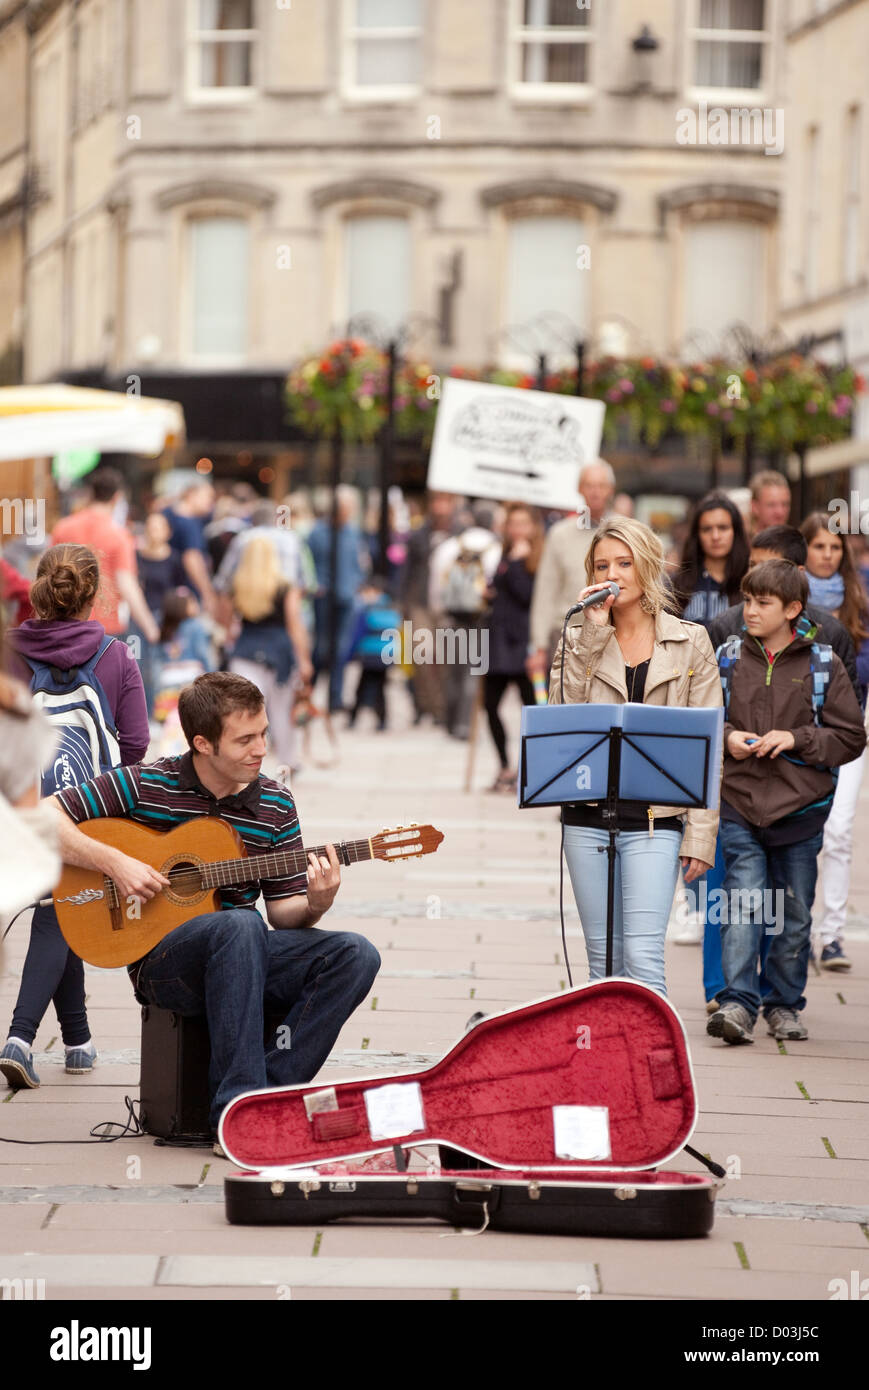 Street performers - A guitar player and singer performing on the streets of bath Somerset UK Stock Photo